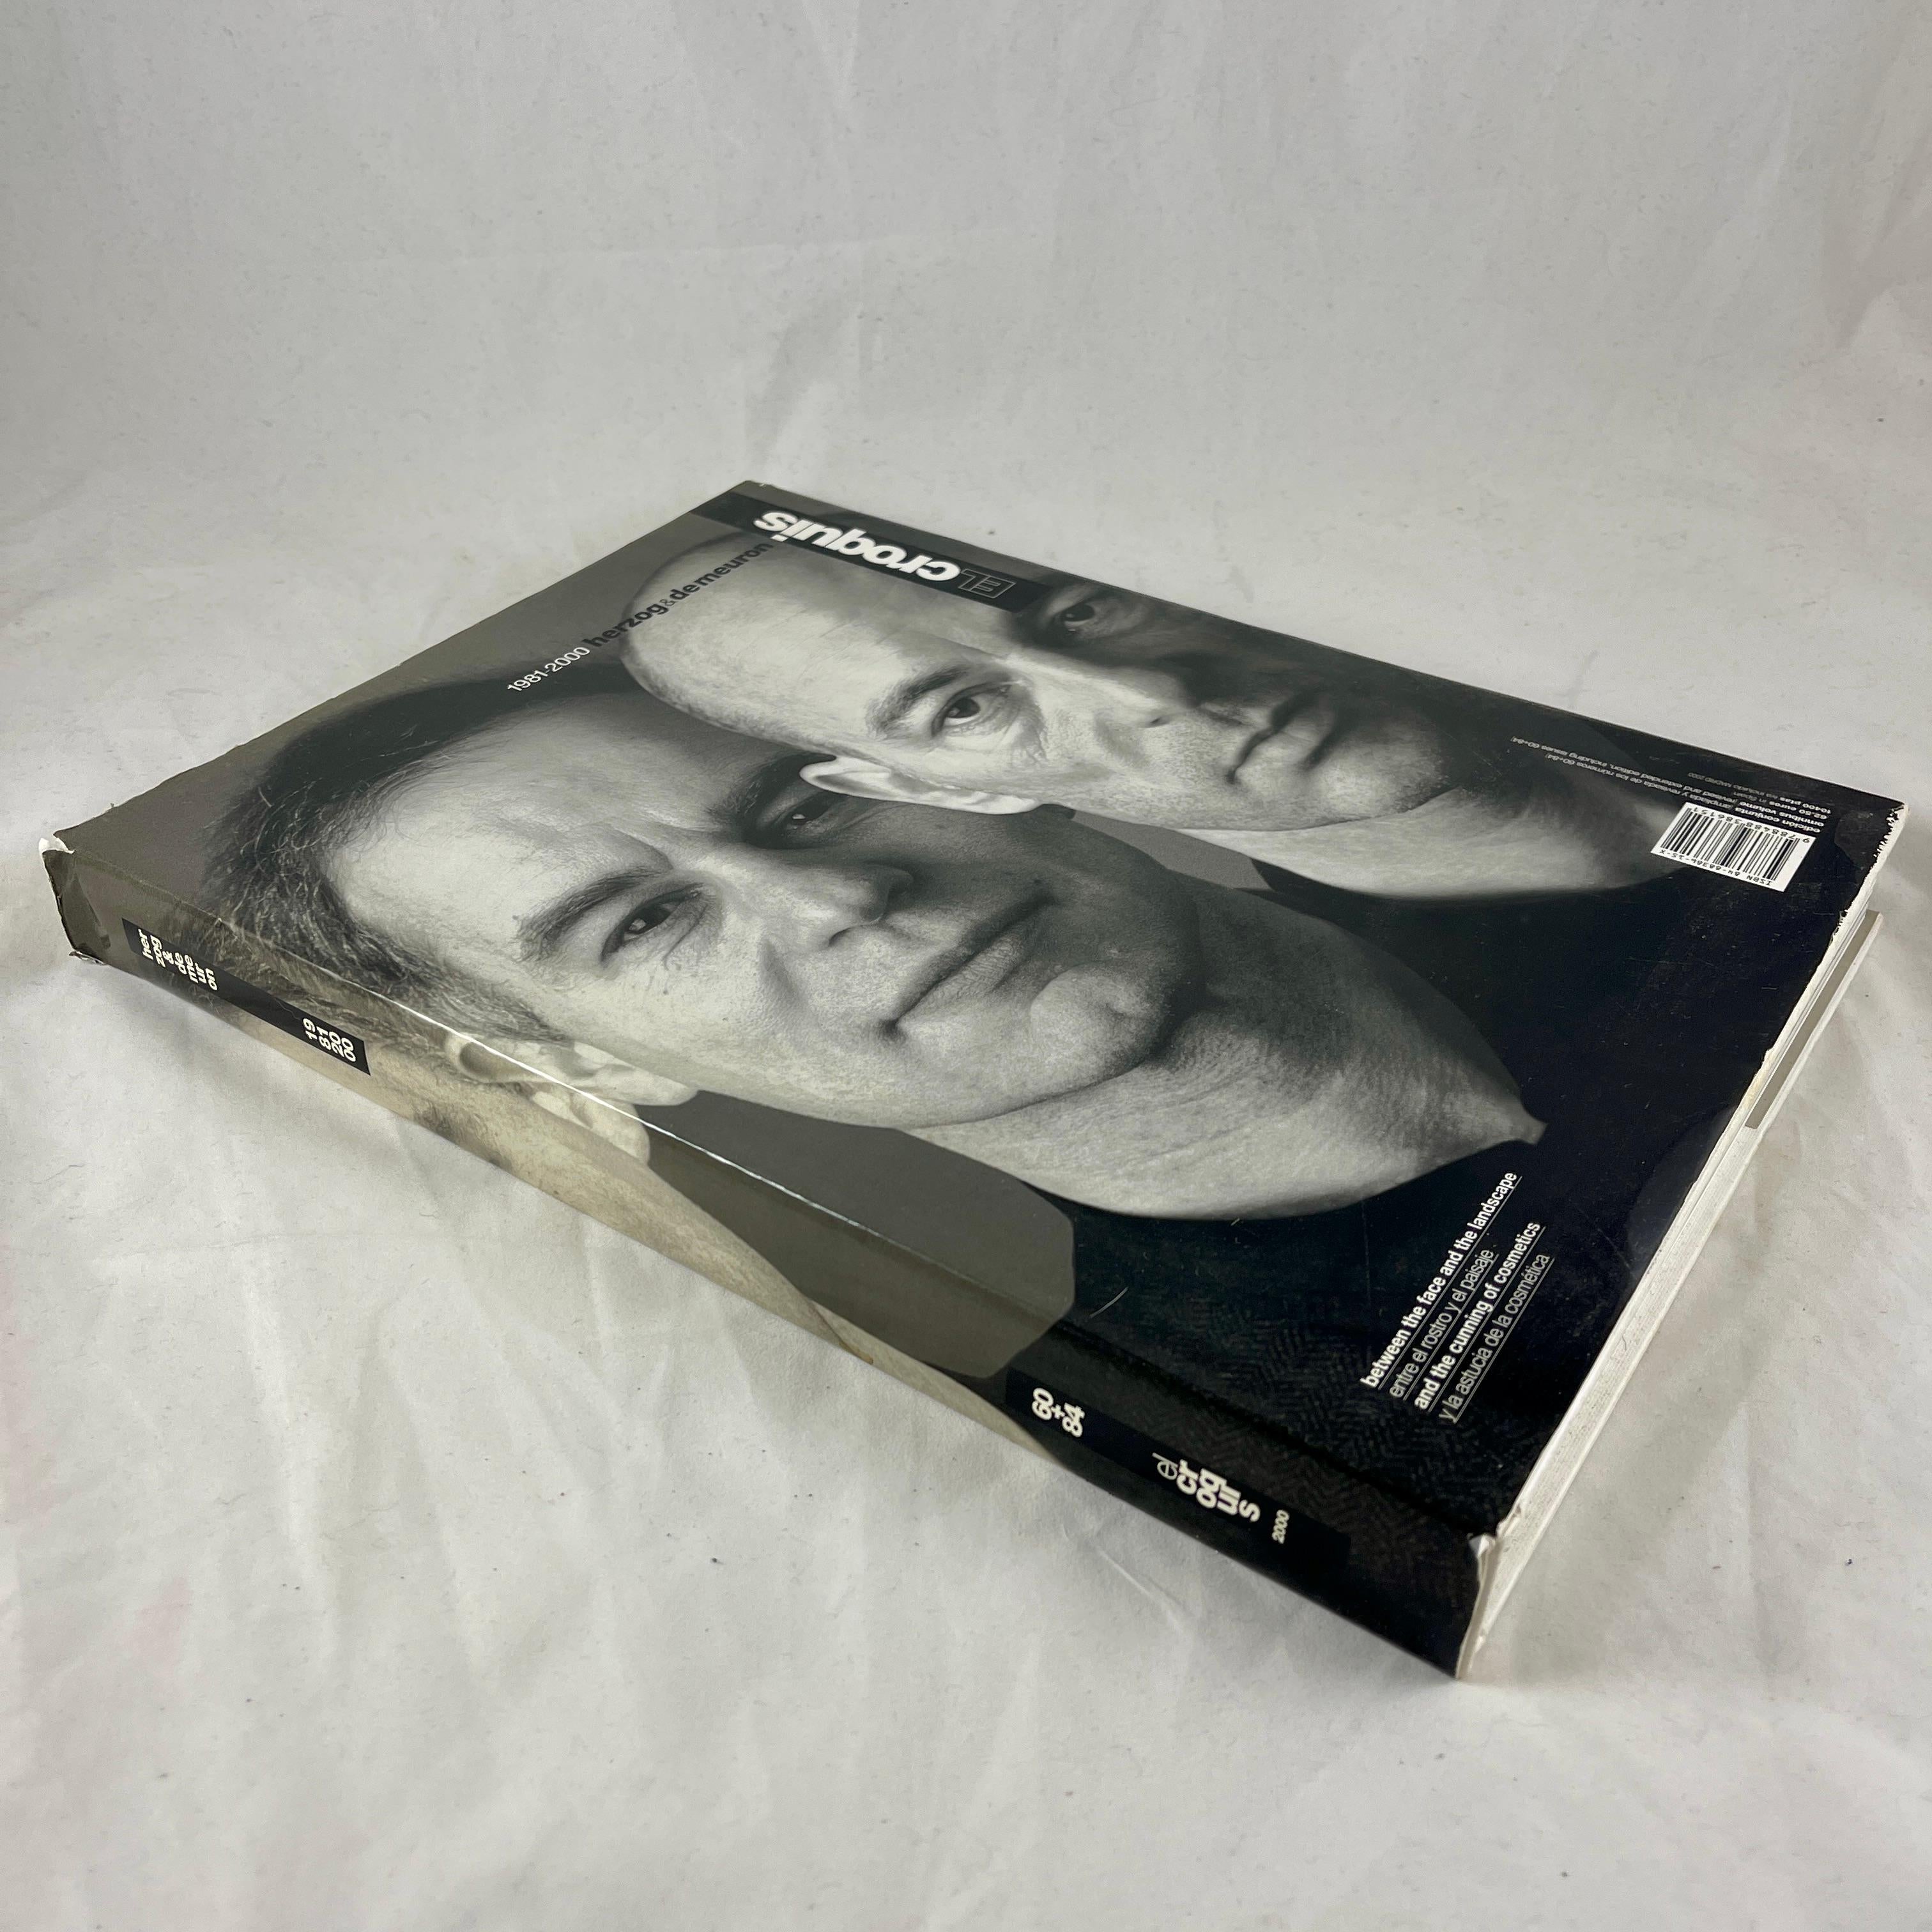 HERZOG & DE MEURON 1981-2000 – English and Spanish Edition – with dust jacket.

Combined and updated version of the issues 60 and 84. Added are recently completed buildings such as the Tate Gallery of Modern Art in London and Eberswalde Library.